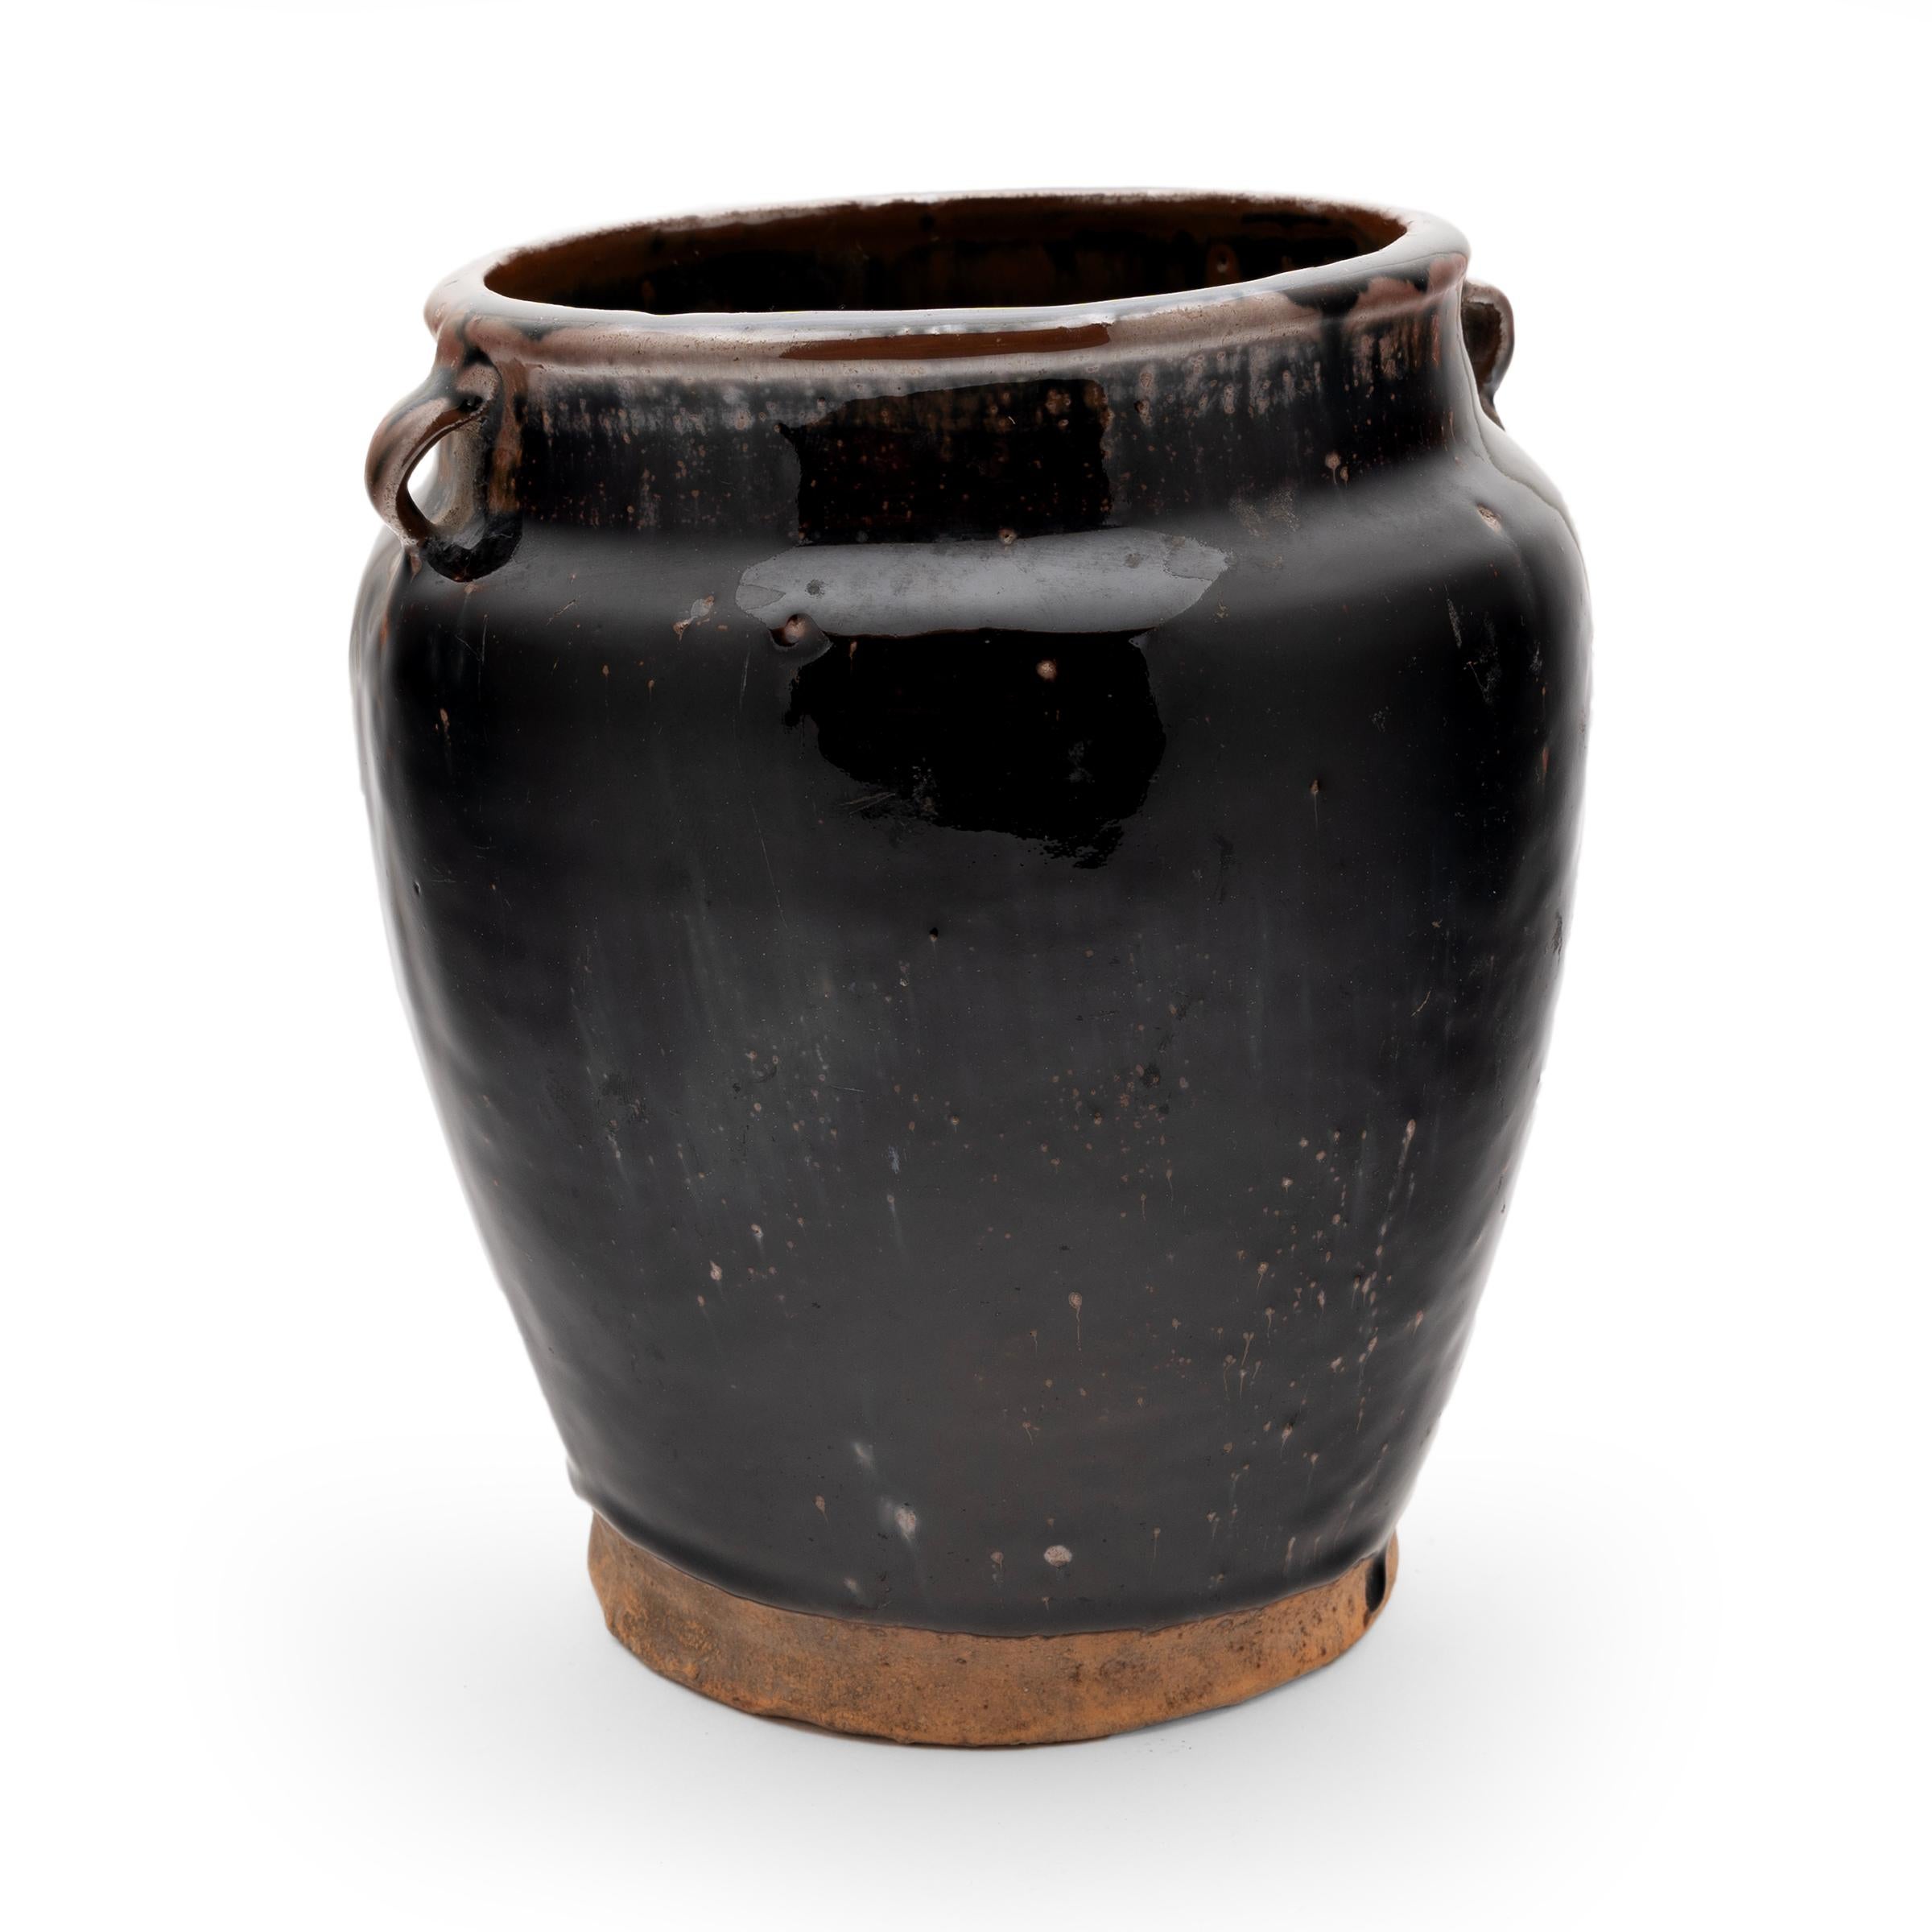 A glossy black glaze clings to the form of this slender kitchen jar's banded surface. The glazed vessel dates to the early 20th-century and was used for storing food and condiments in a provincial Qing-dynasty kitchen, as evidenced by its interior